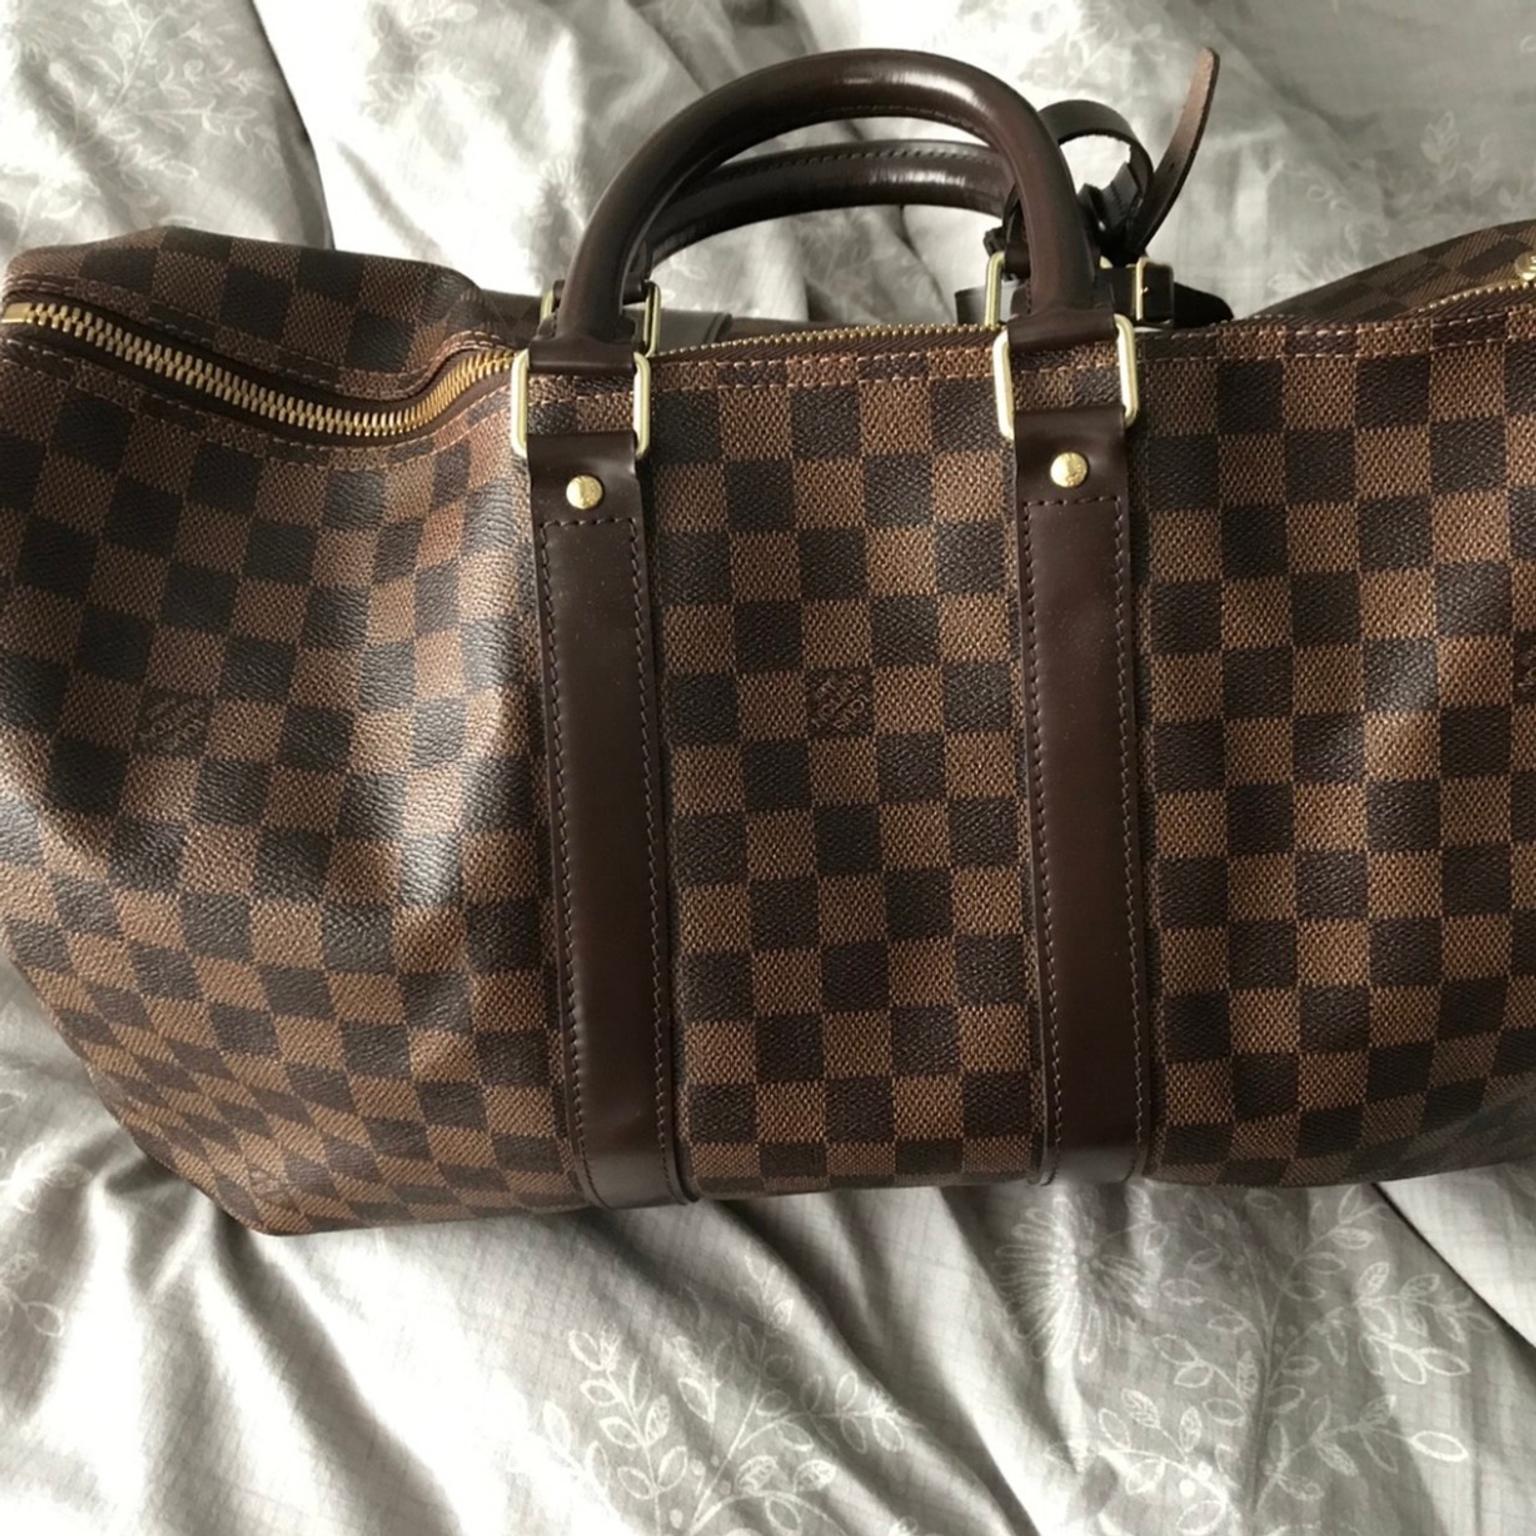 Louis Vuitton keepall 45 with box and receipt in CO2 Colchester for £650.00 for sale | Shpock